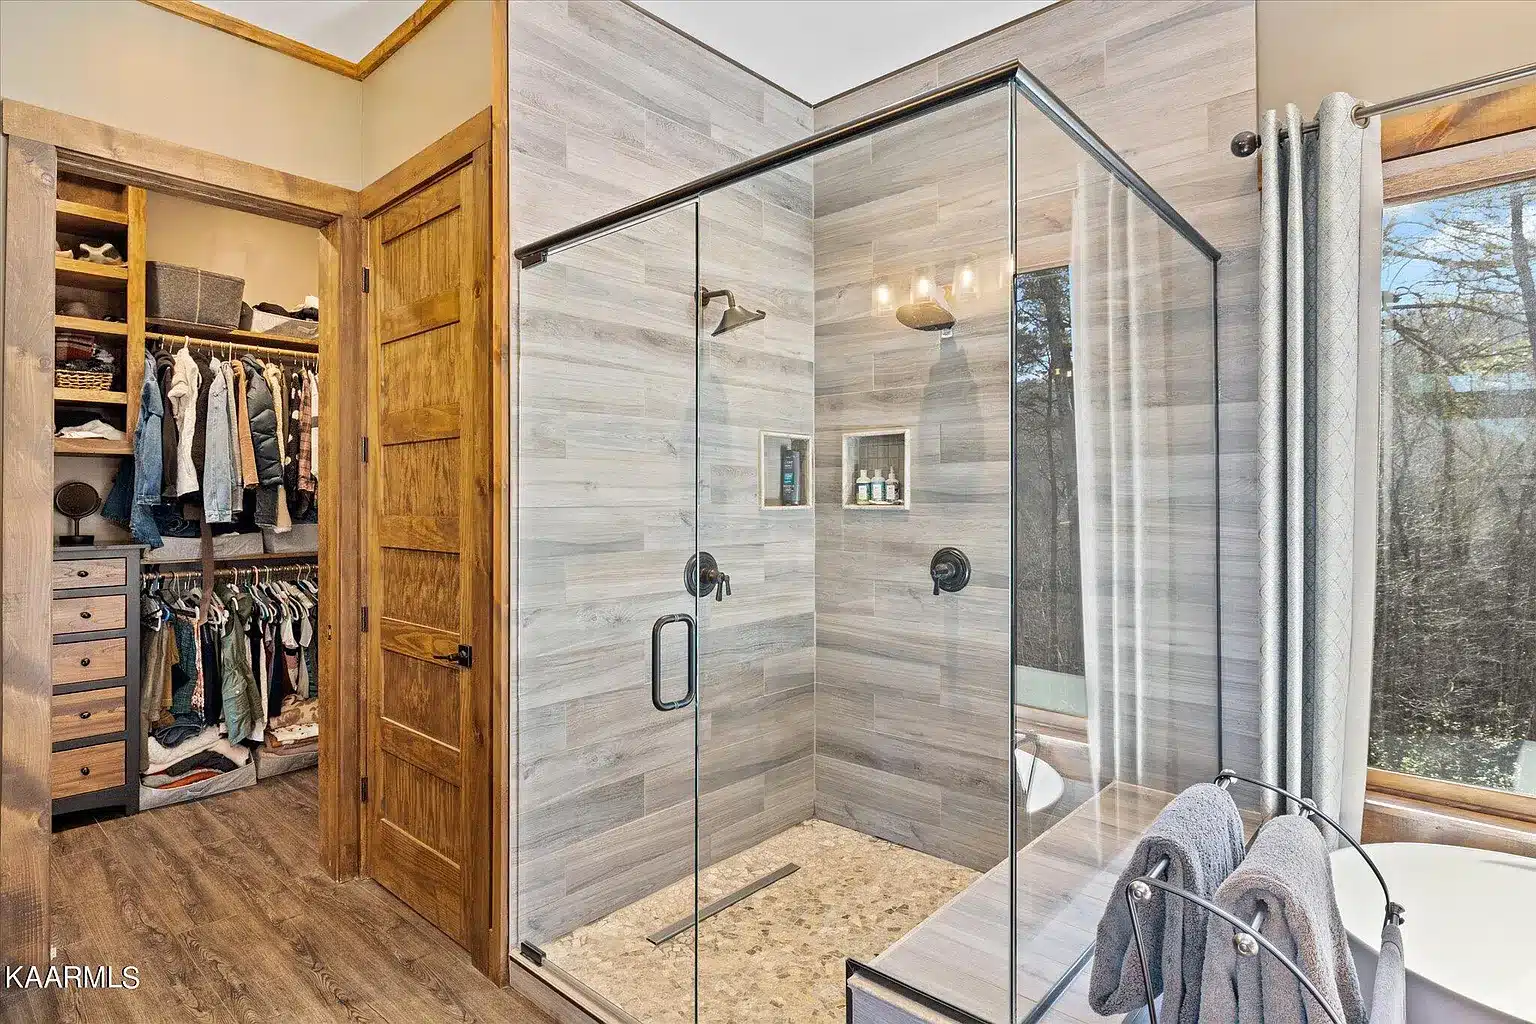 All glass shower with seat, wooden wall tile textures and stone floor tile used with long floor drain for more water flow